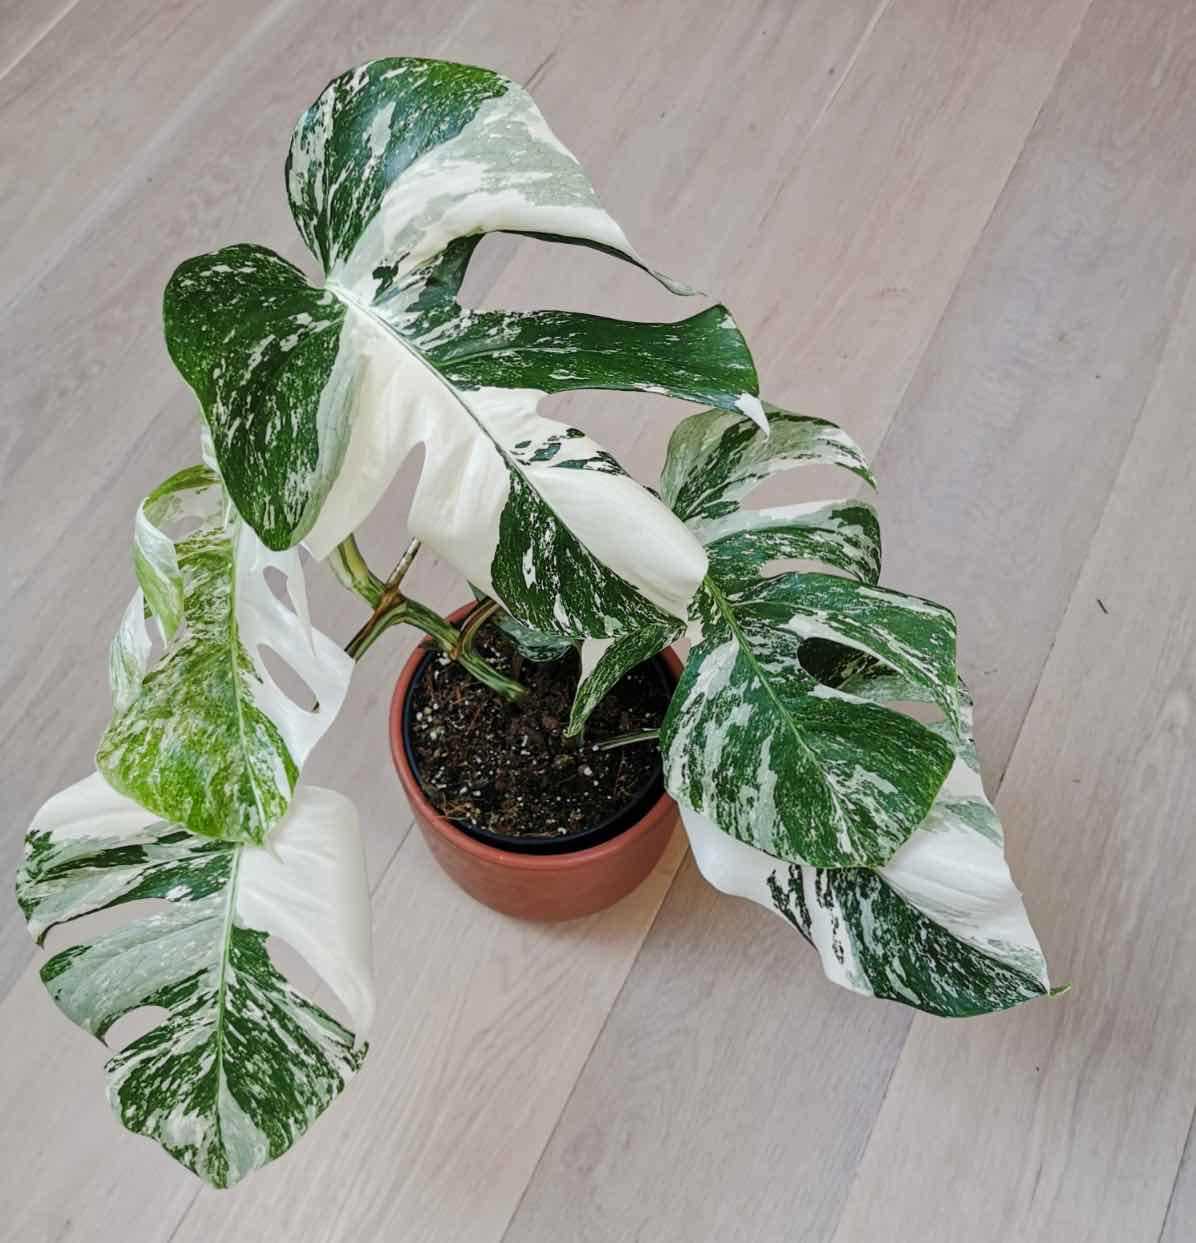 Light requirements for Monstera albo